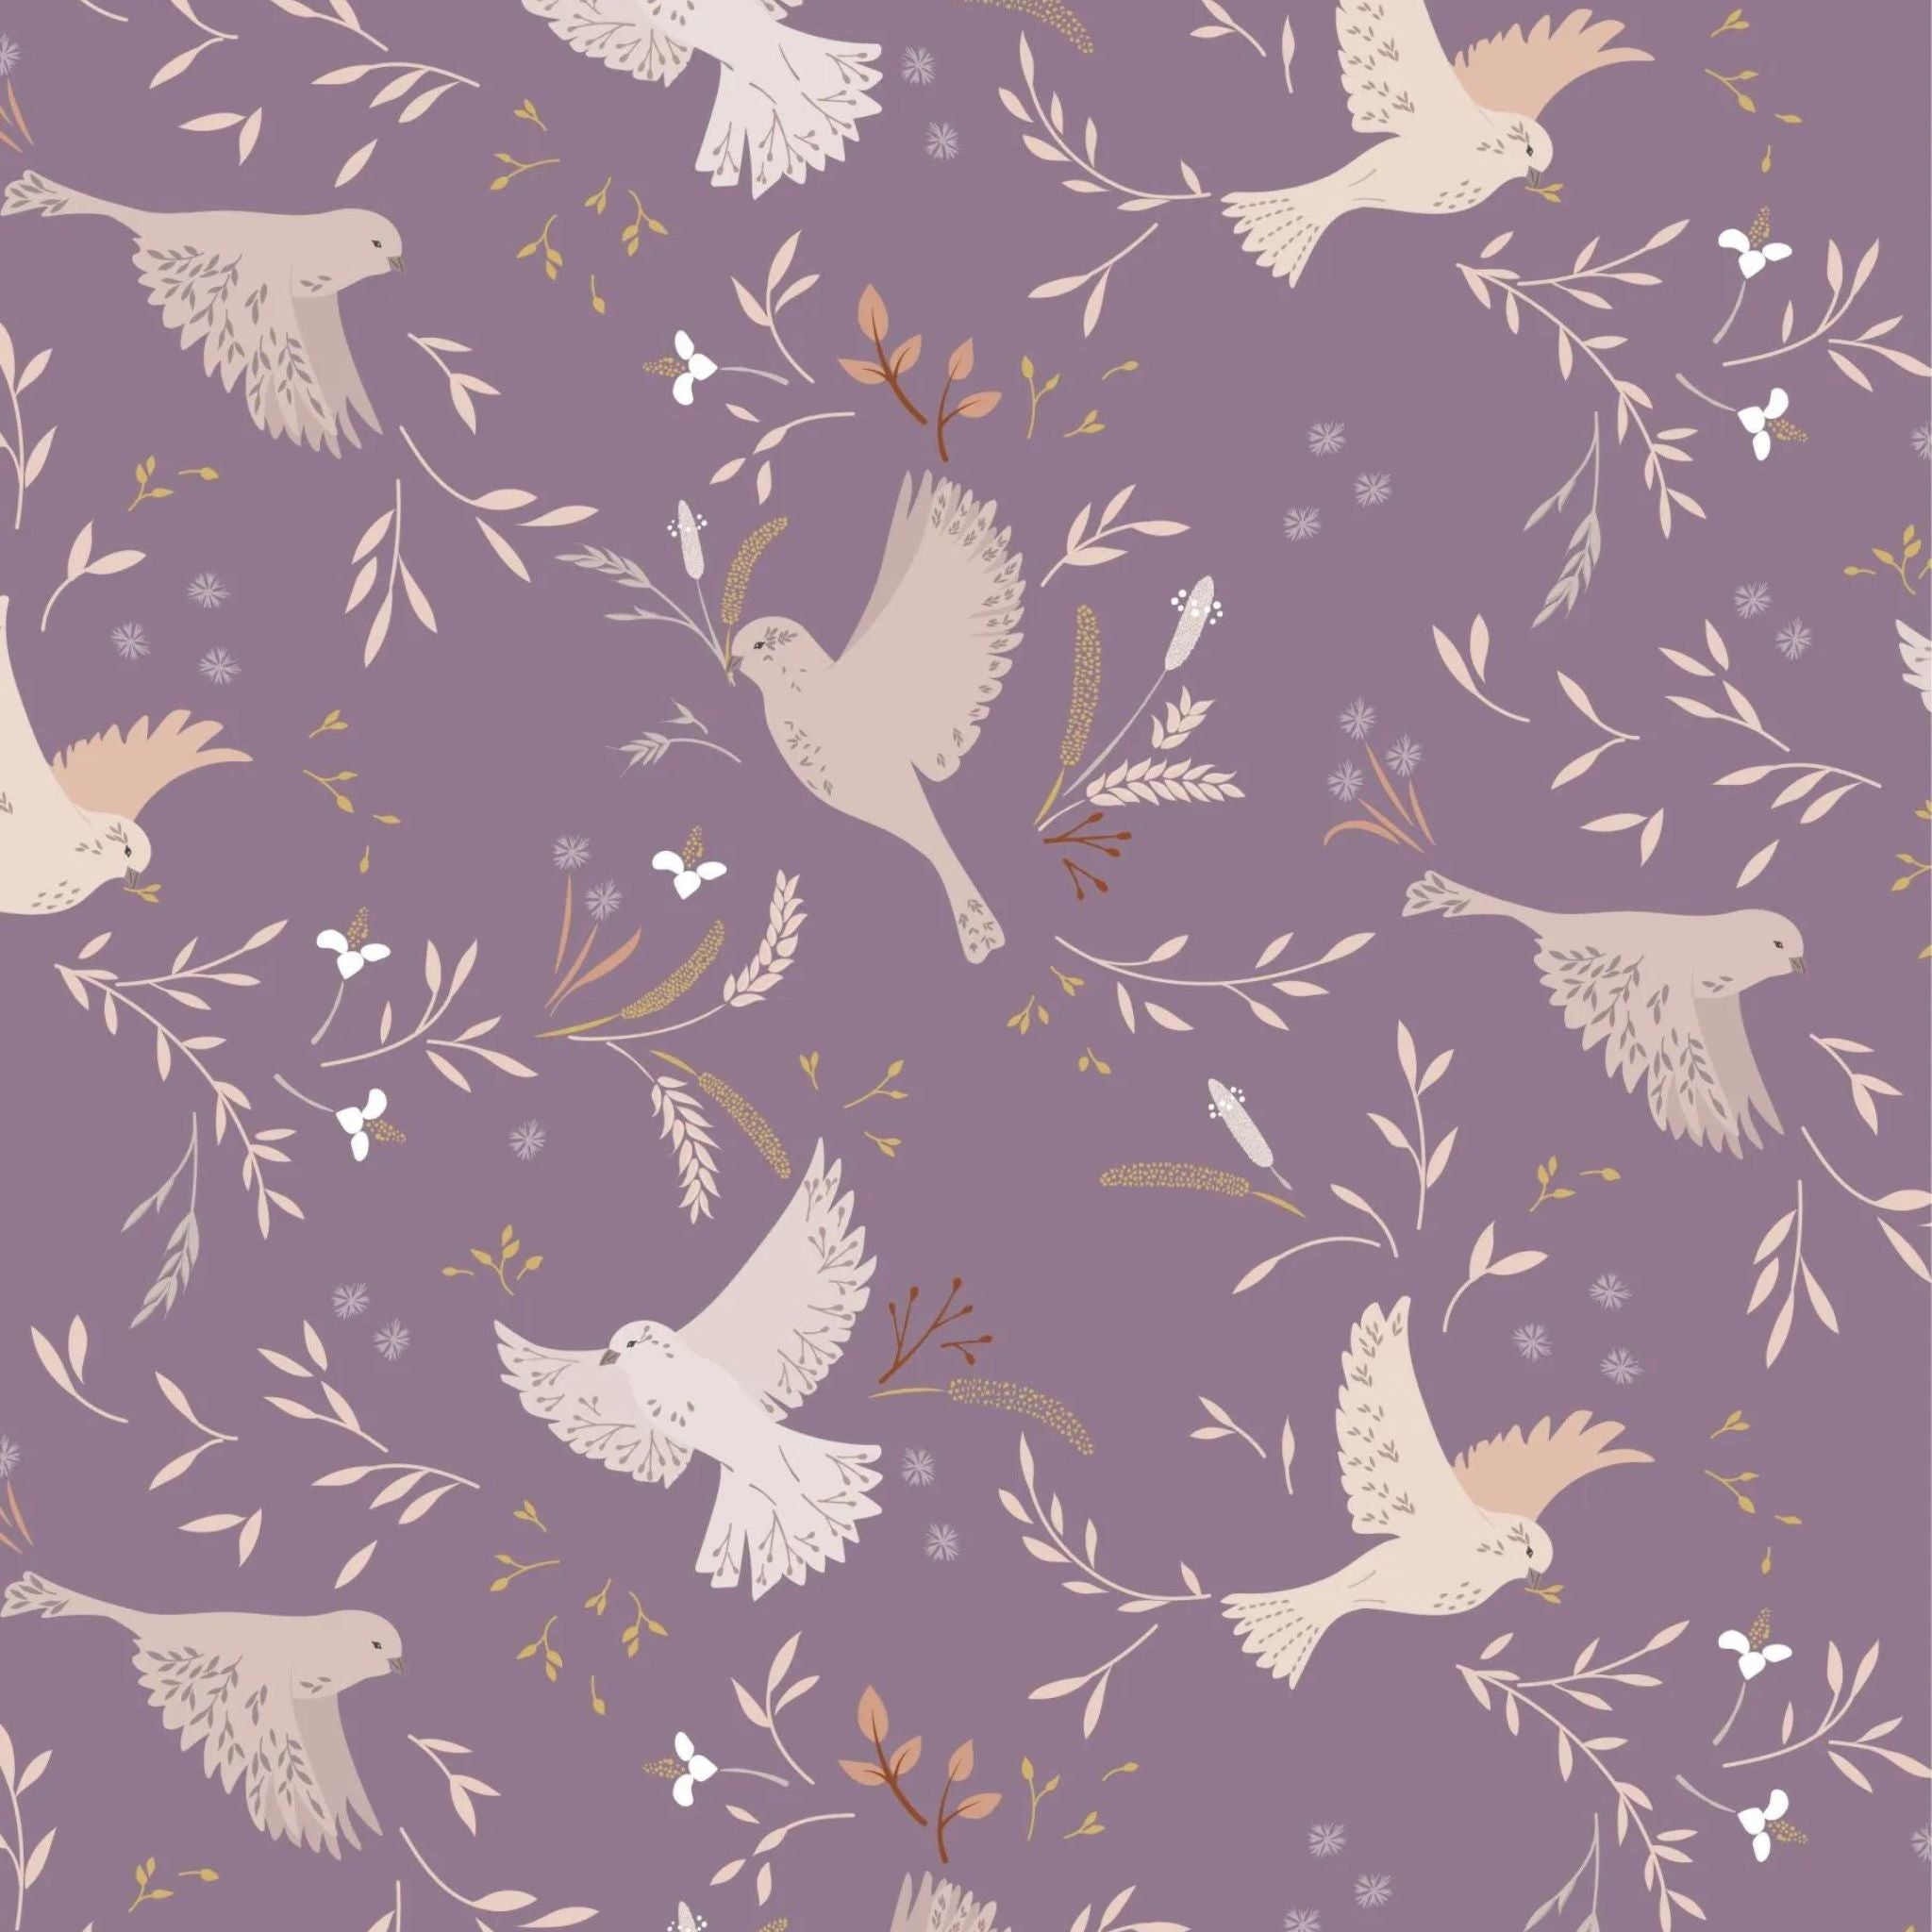 Flying birds gather the field grasses on a lavender cotton fabric - Meadowside by Lewis and Irene